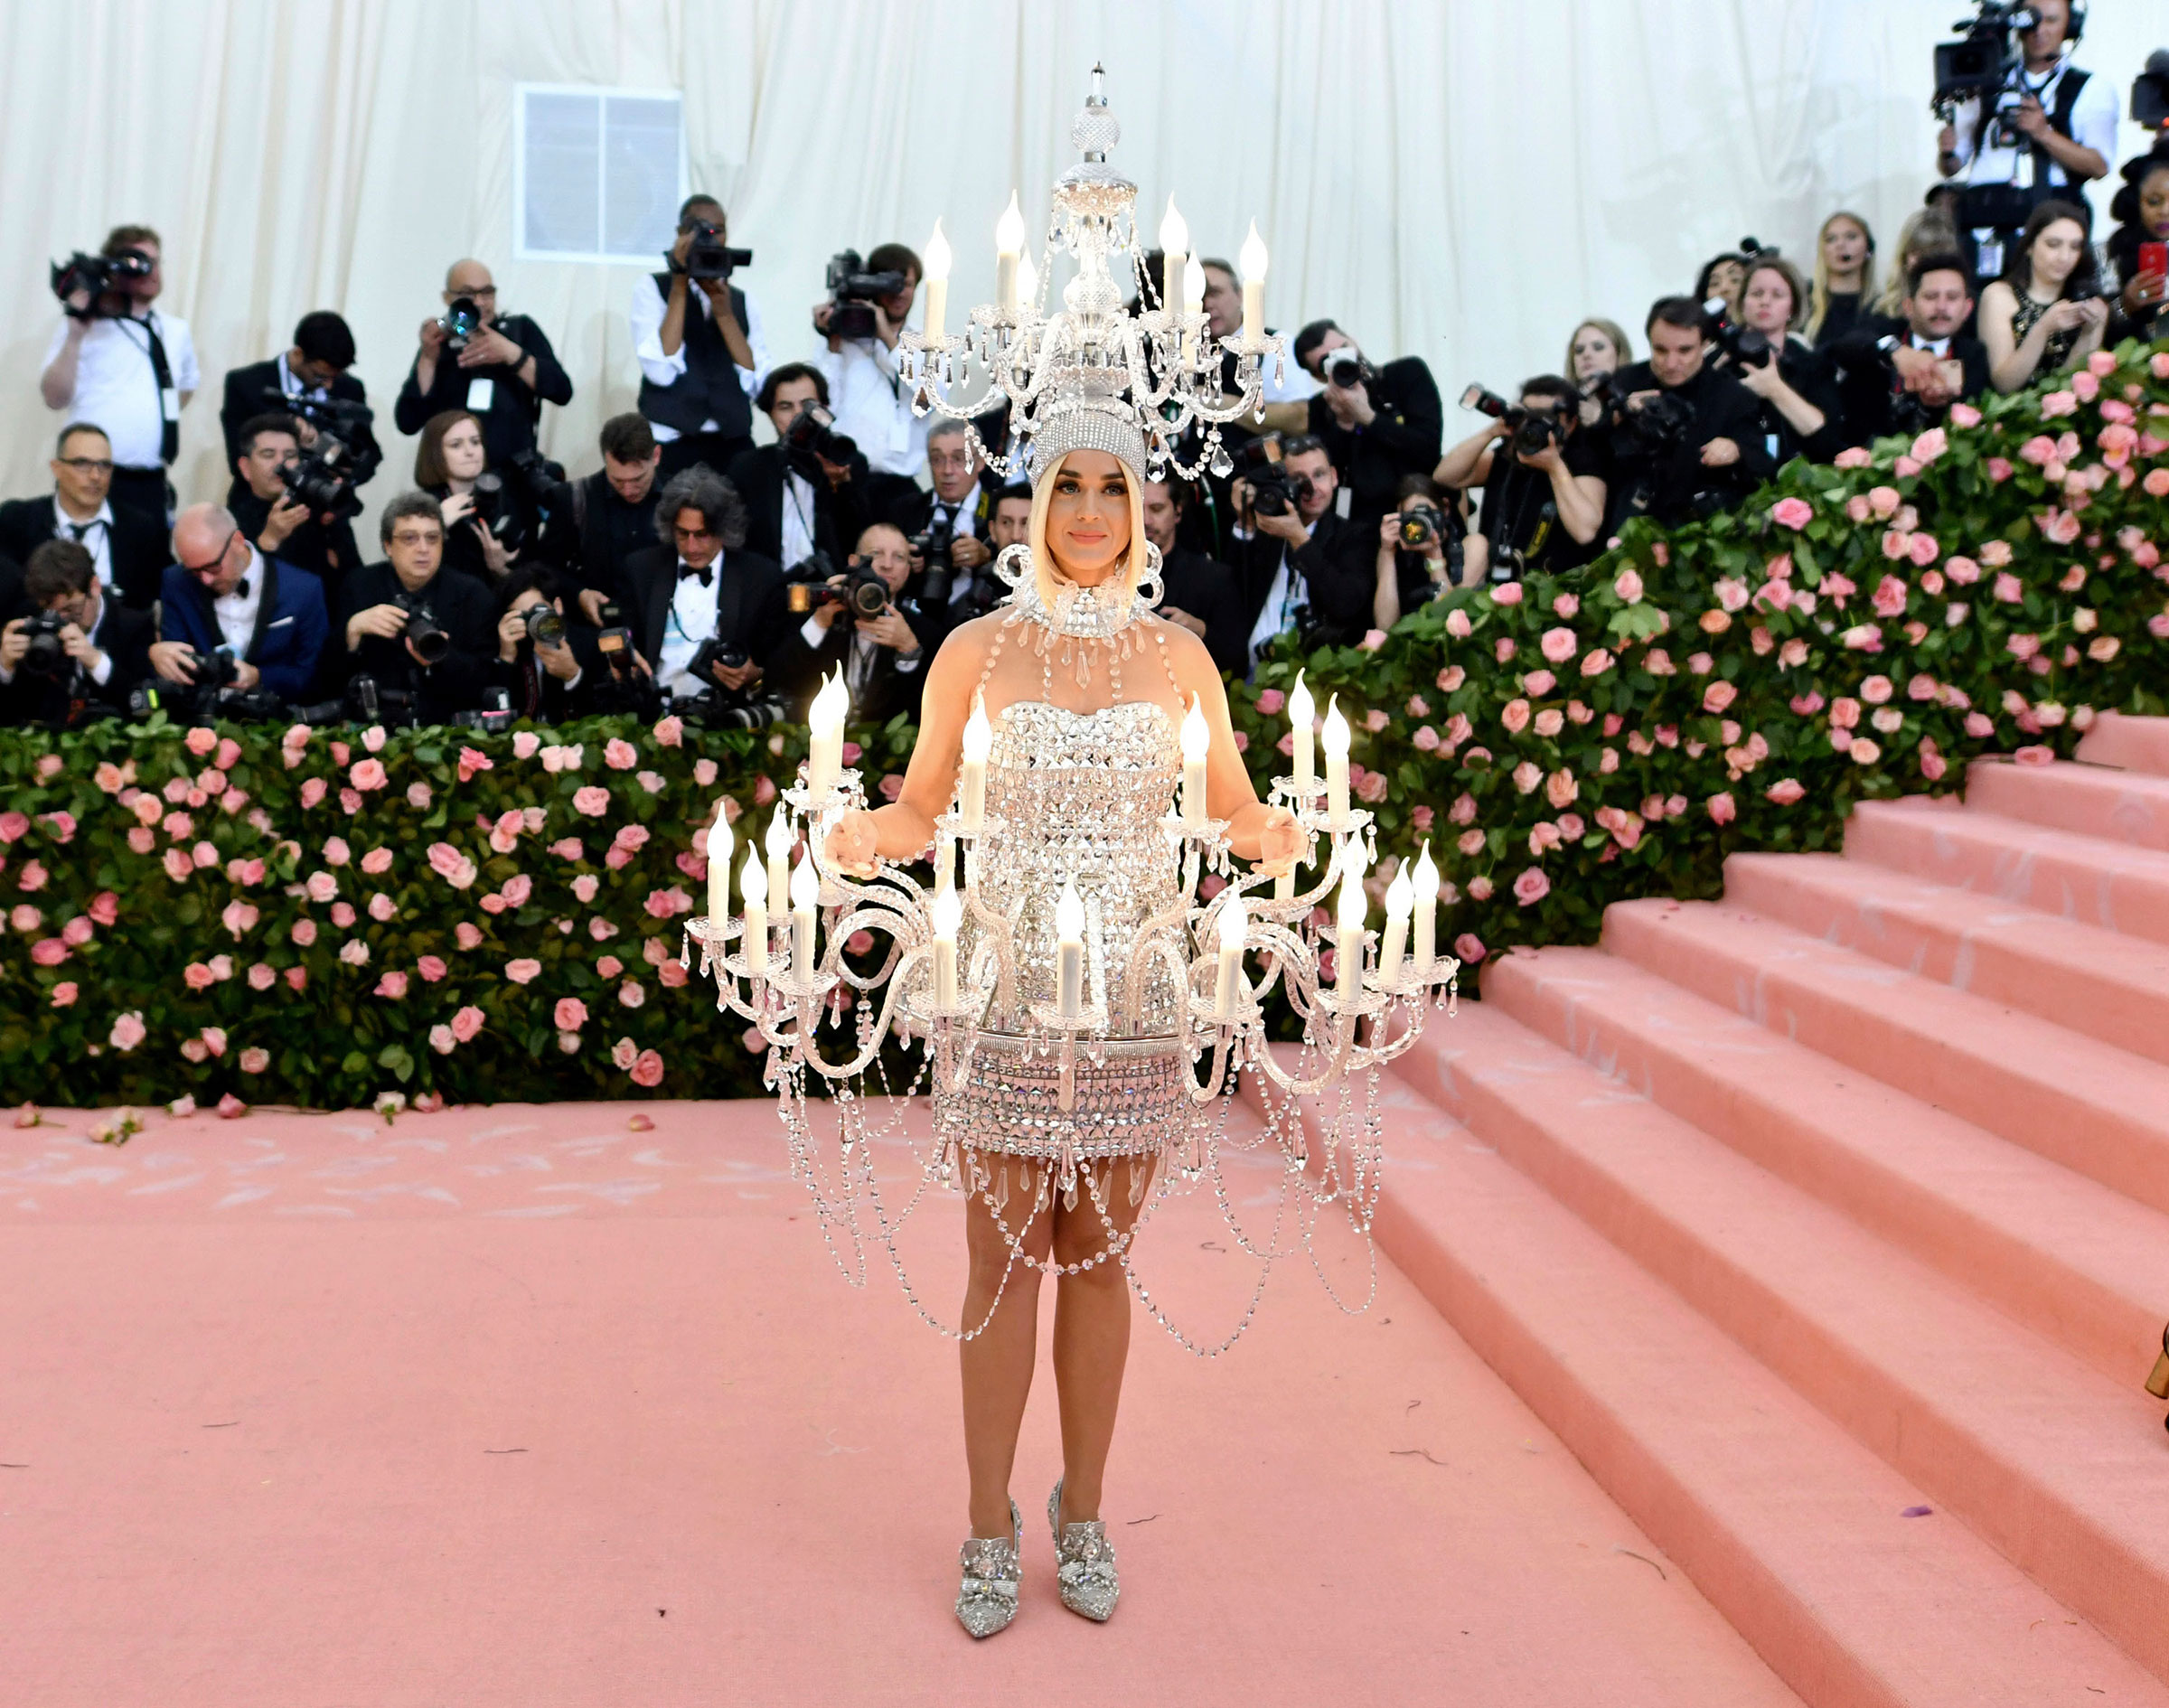 Katy Perry attends The Met gala celebrating the opening of the "Camp